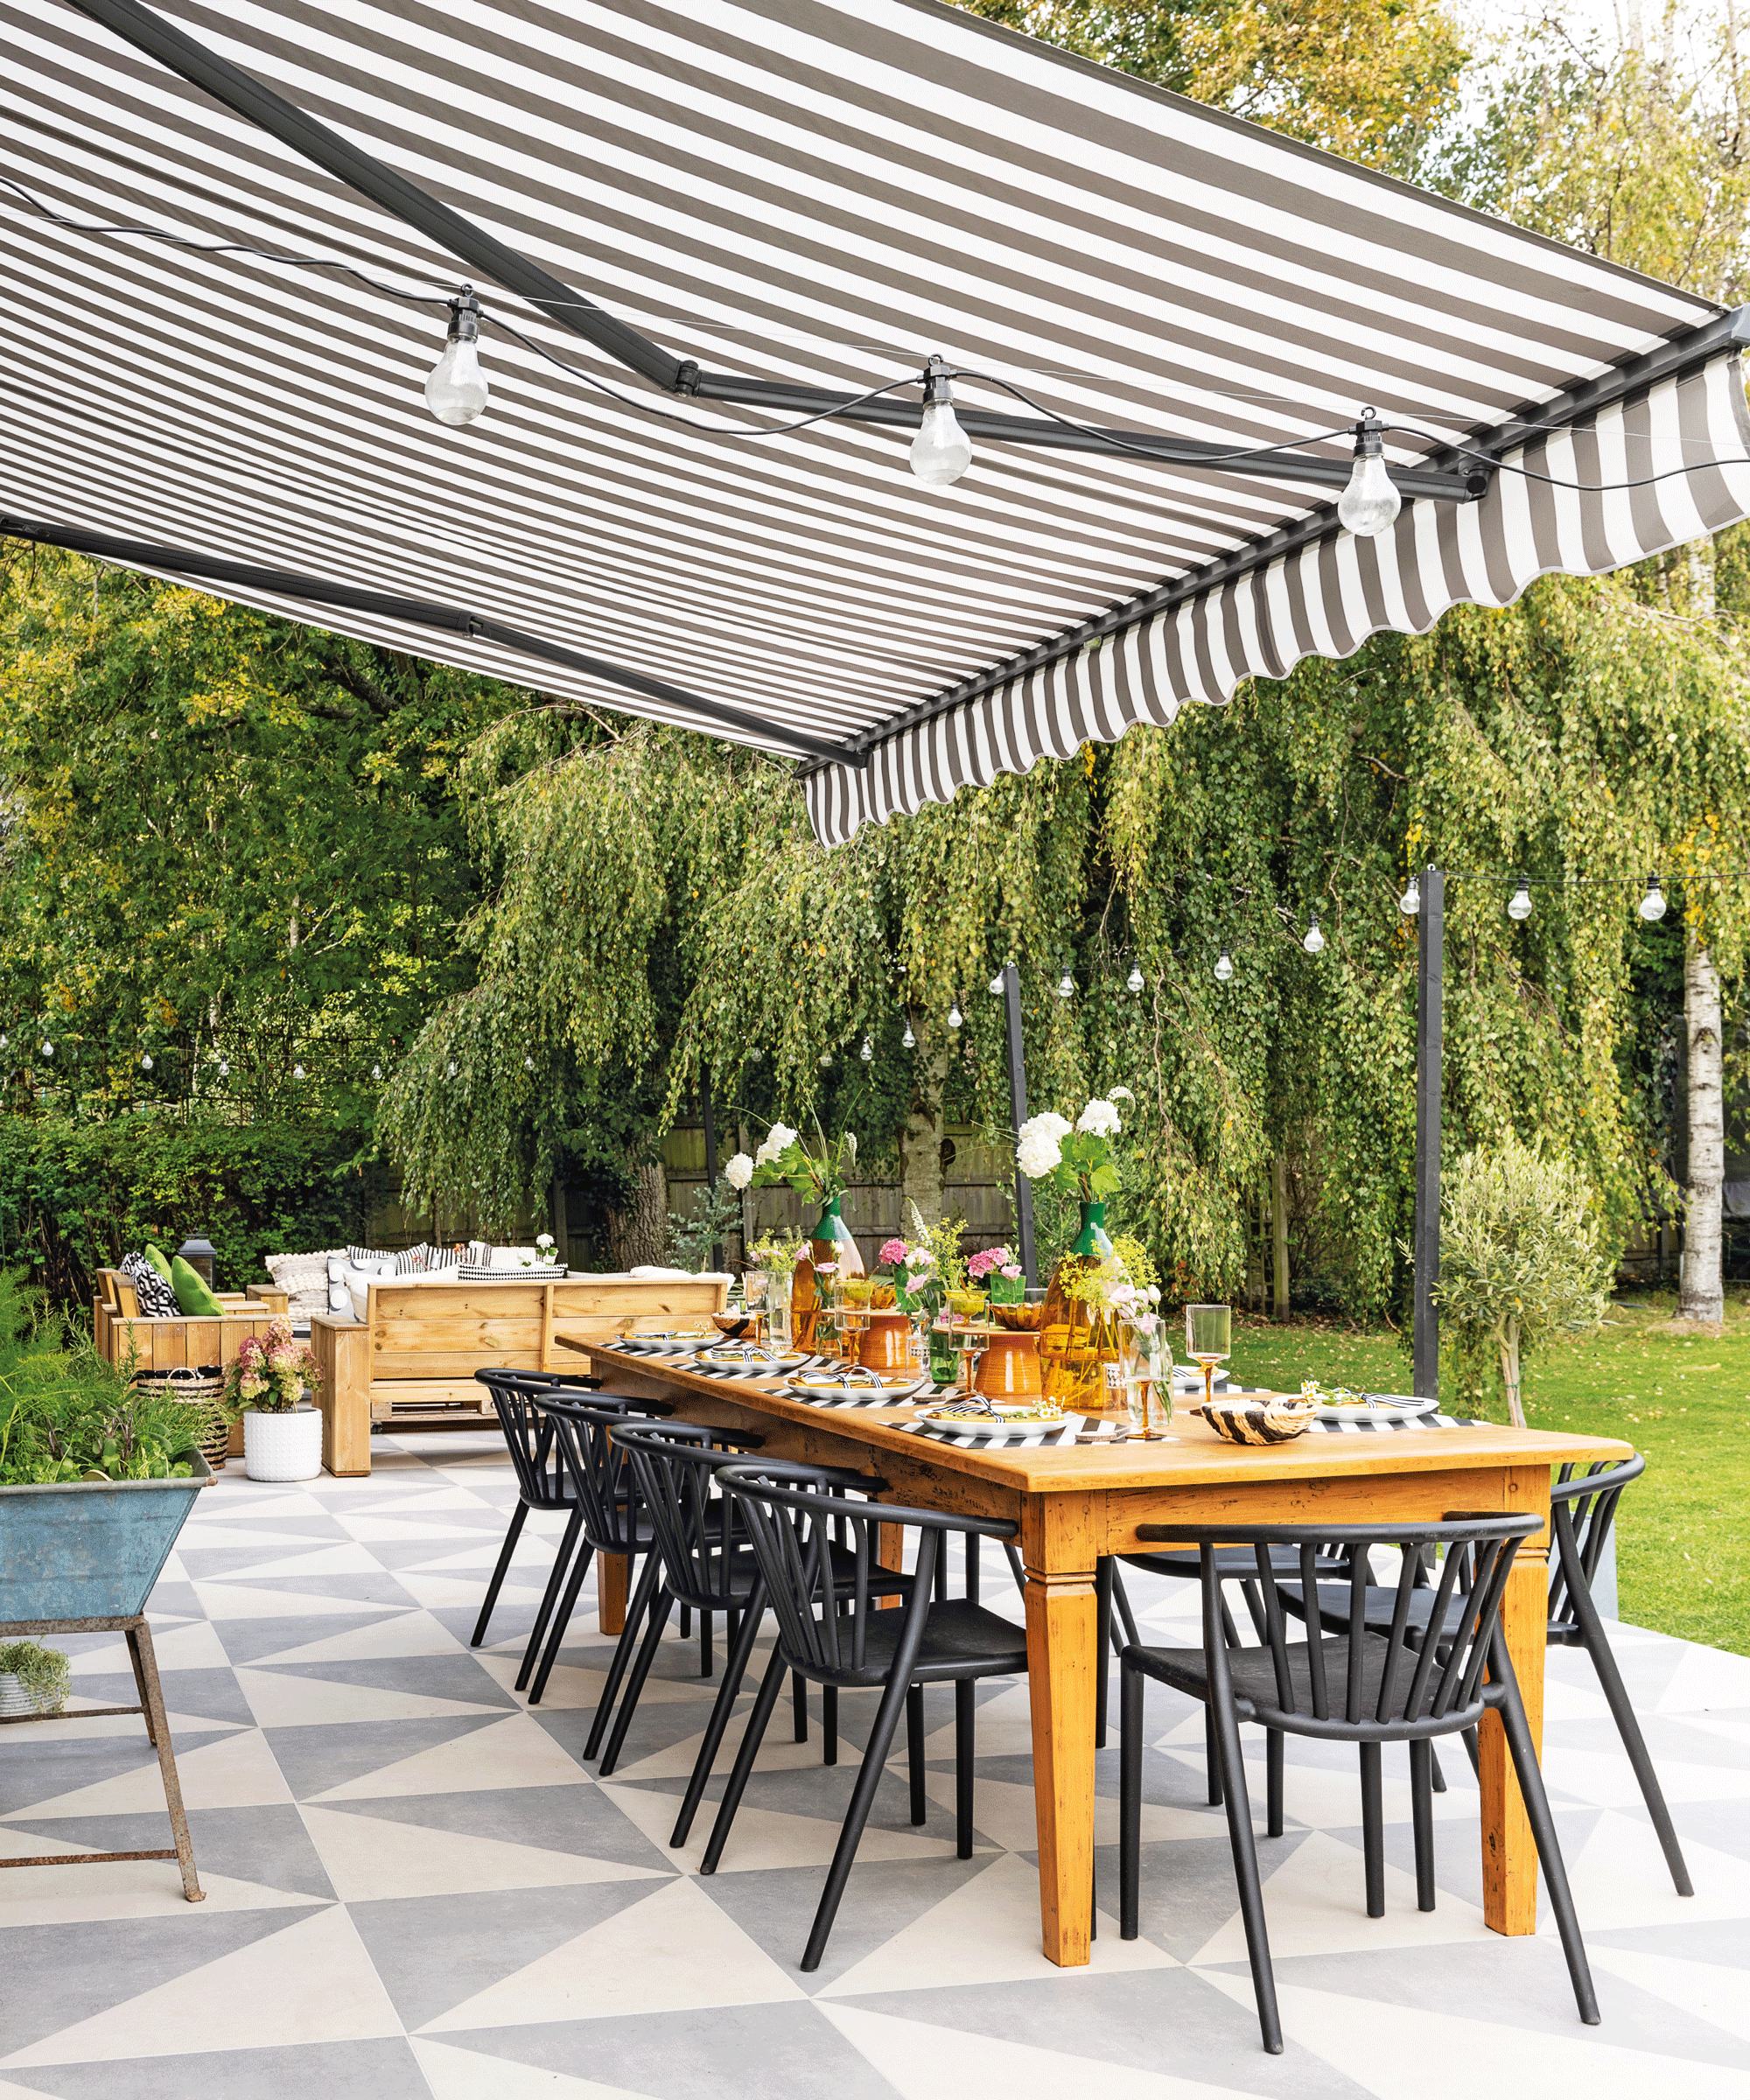 Alfresco dining set-up with fresh flowers on table top, festoon lights, striped awning shade, and large scale mono geo floor tiles.